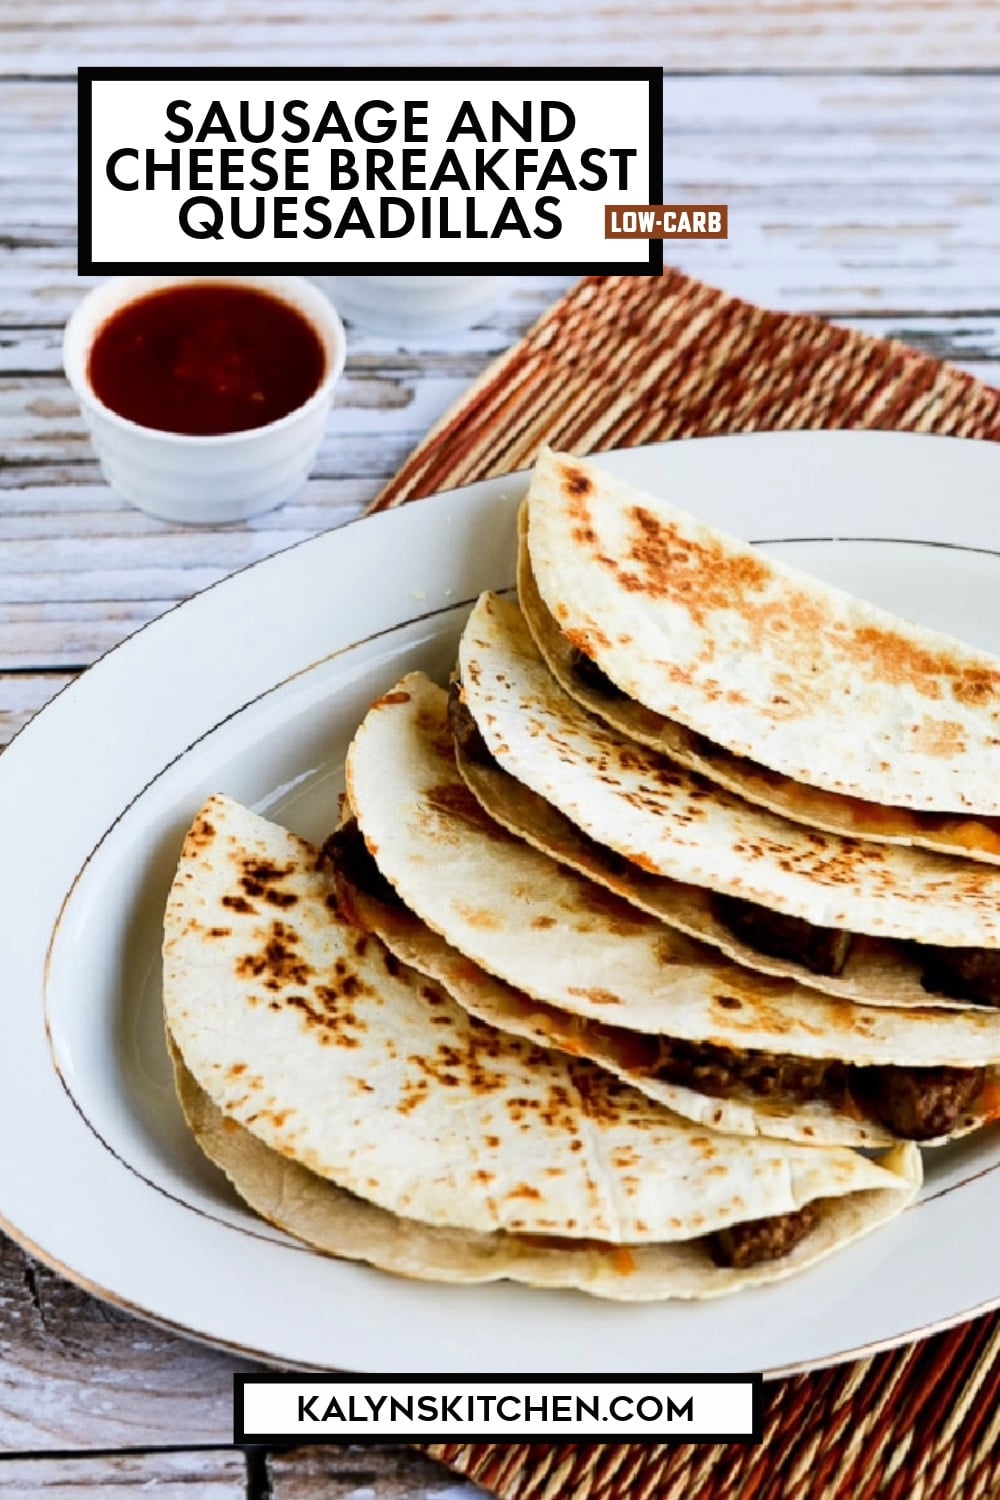 Pinterest image of Sausage and Cheese Breakfast Quesadillas